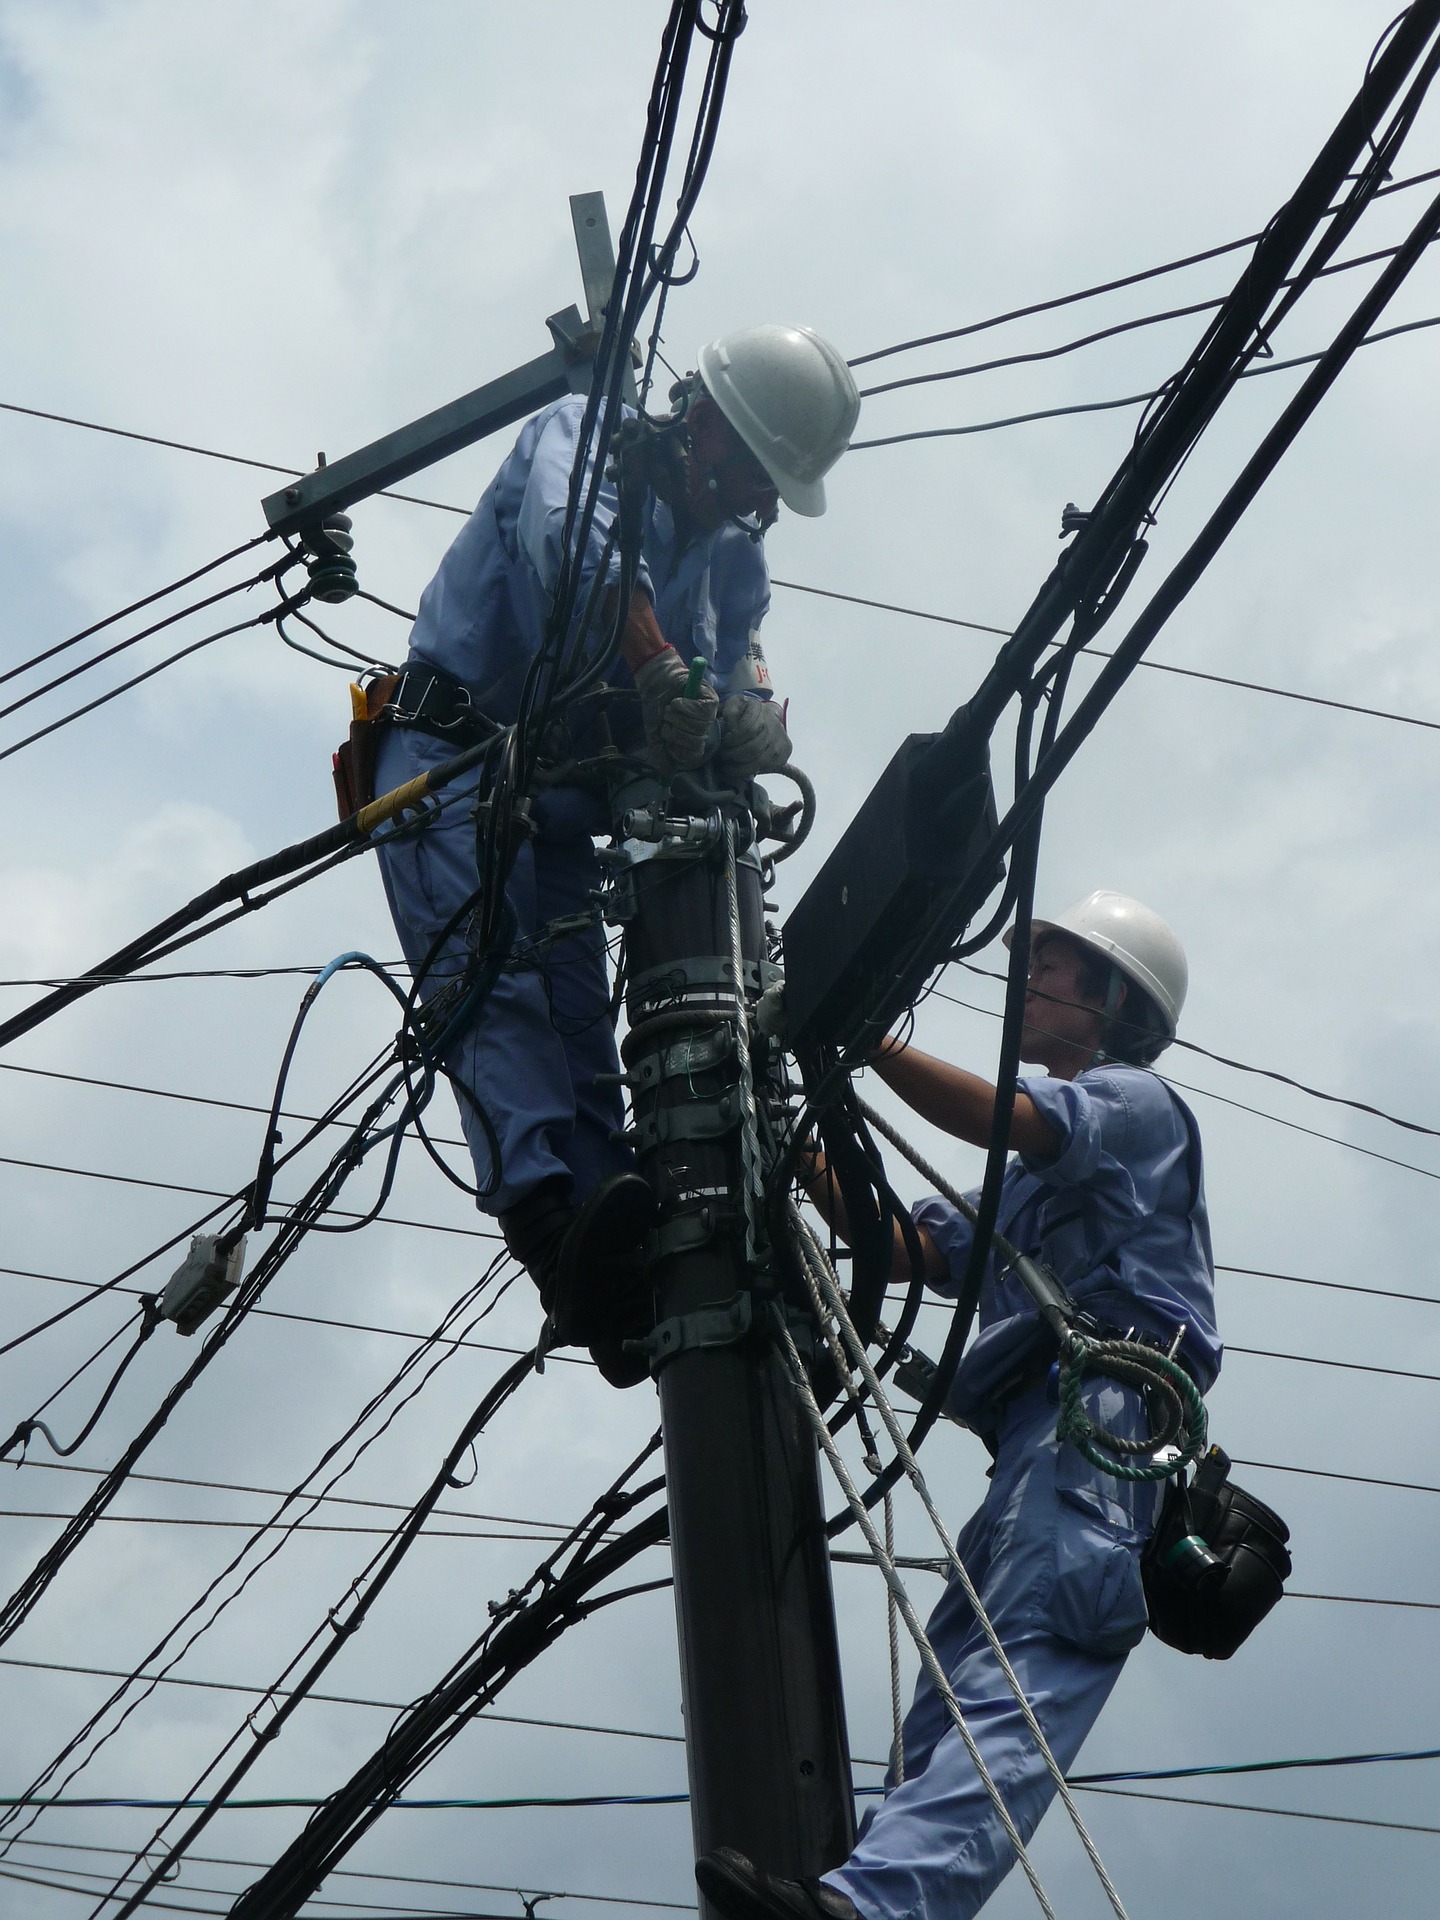 Licensed Electricians